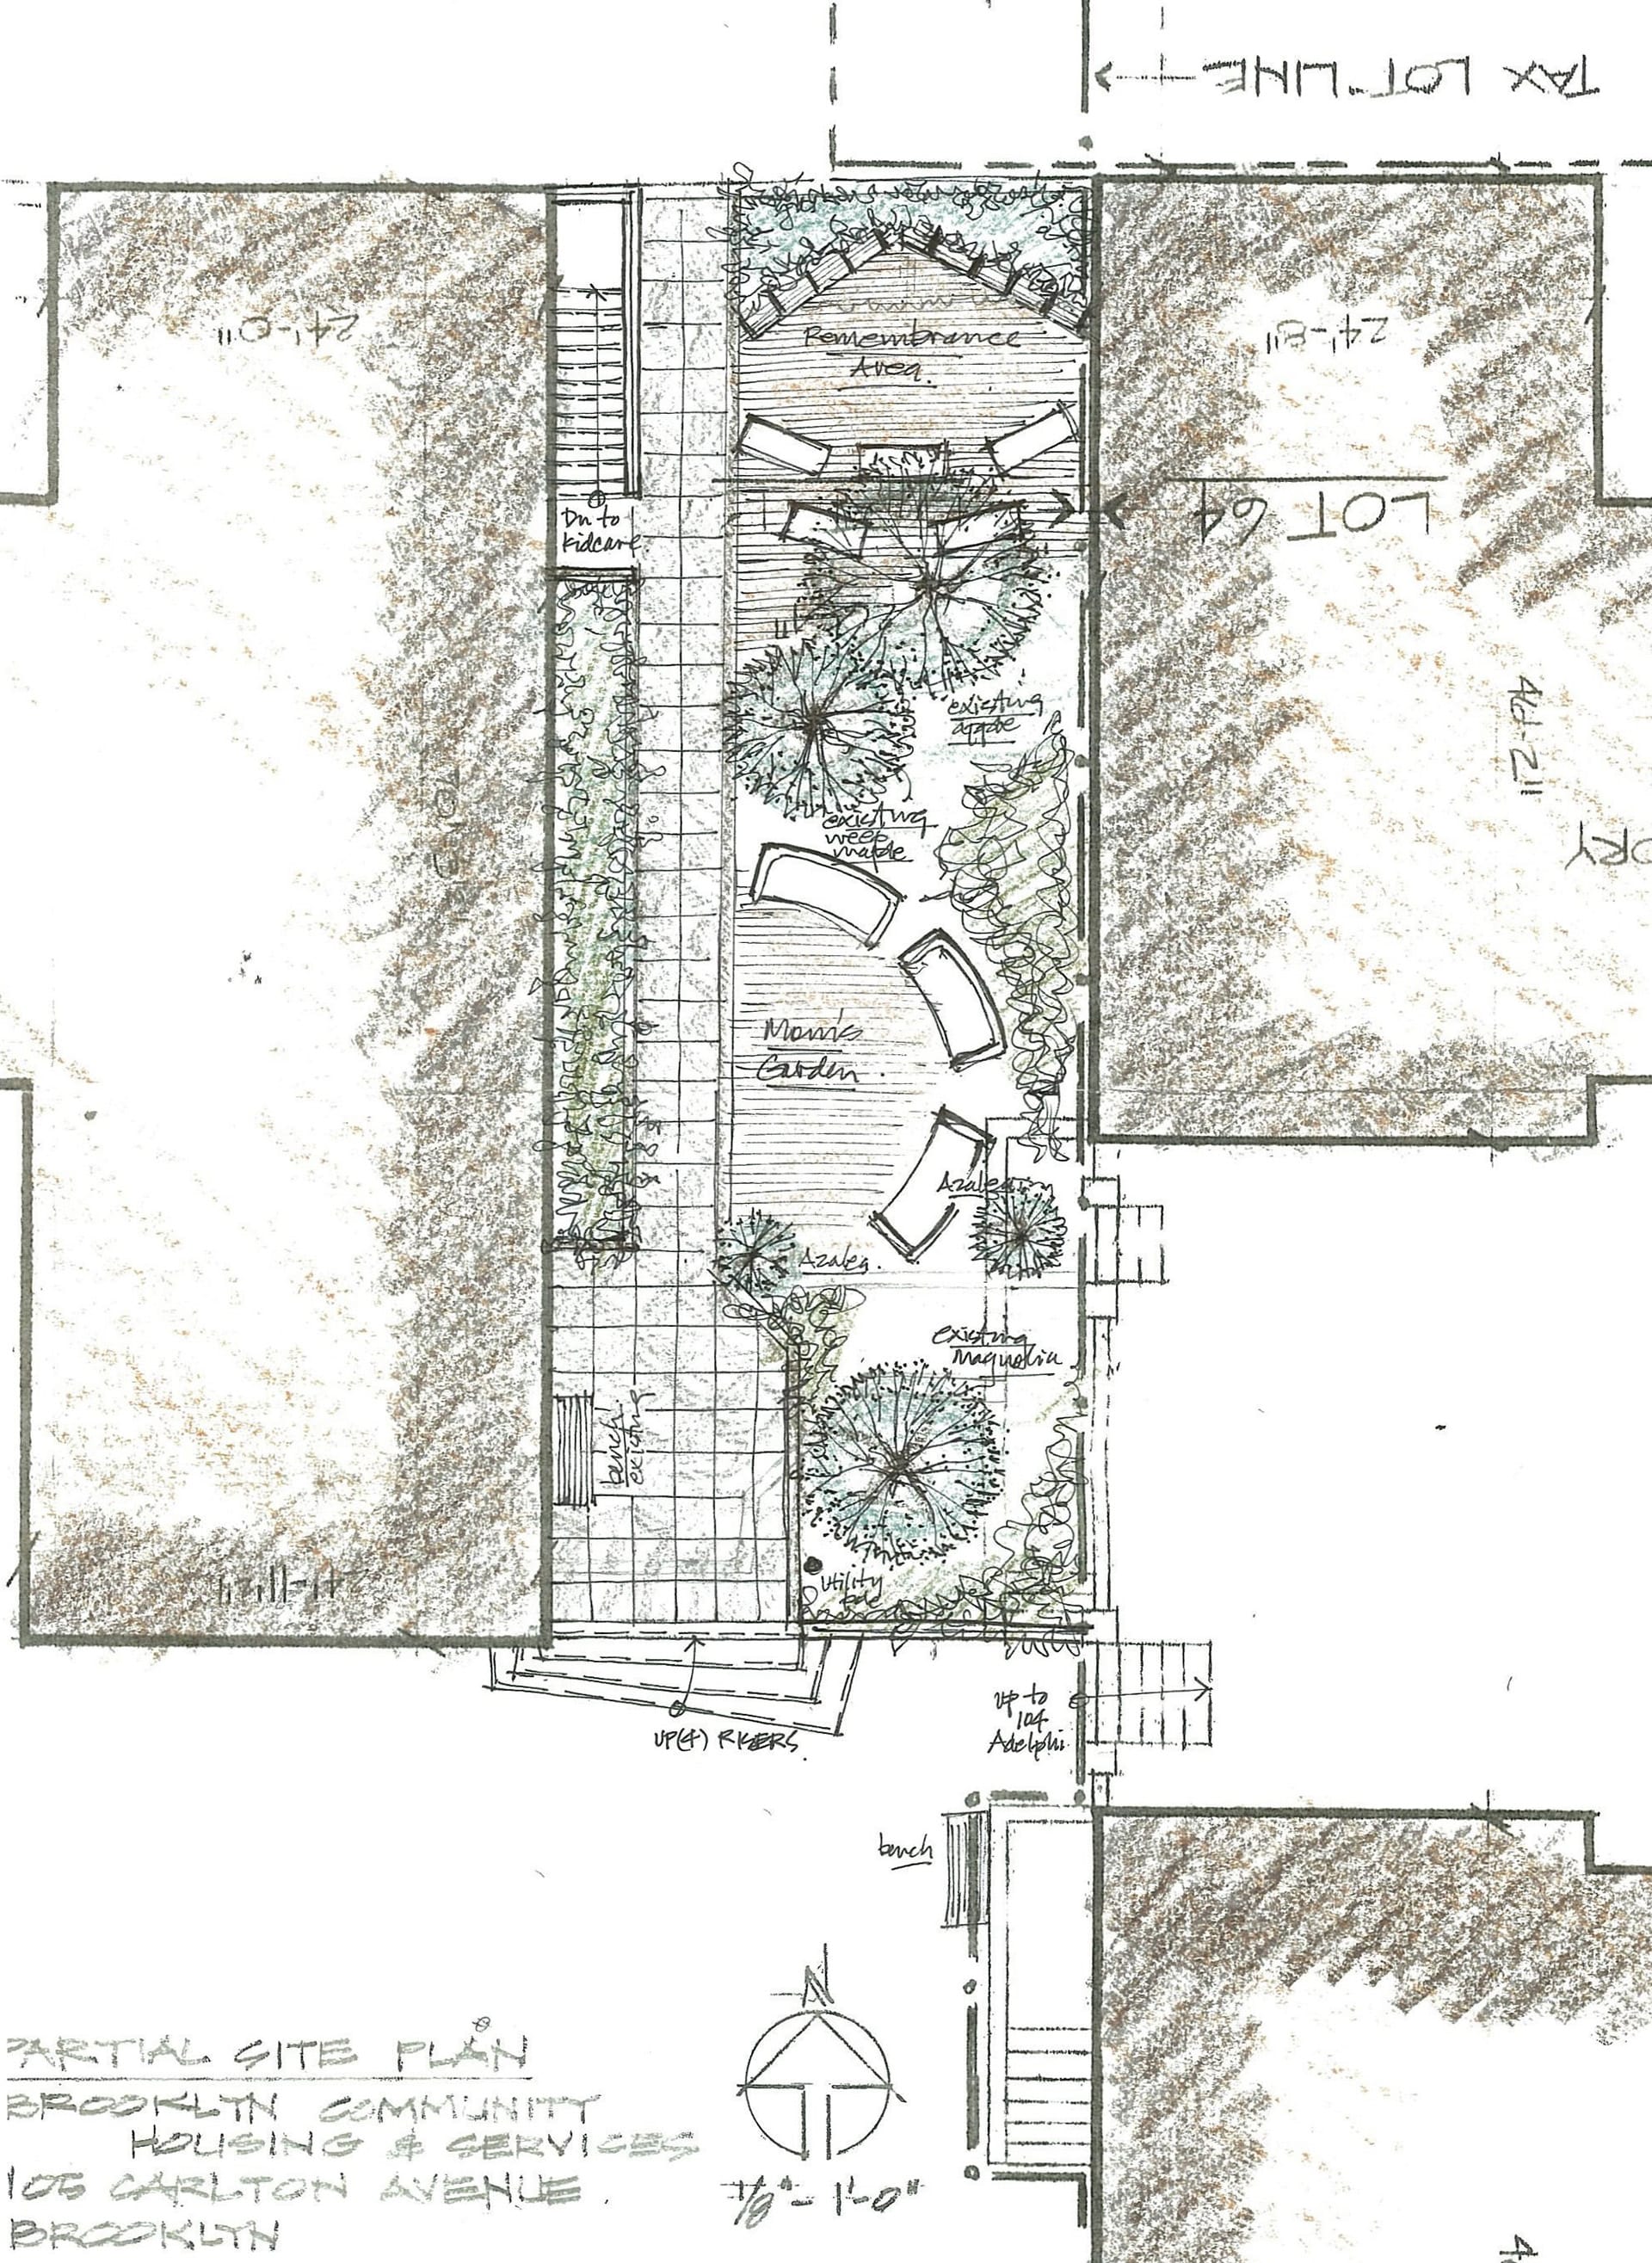 Sketch of a plan for a garden in a courtyard with bluestone pavers, trees, and benches.